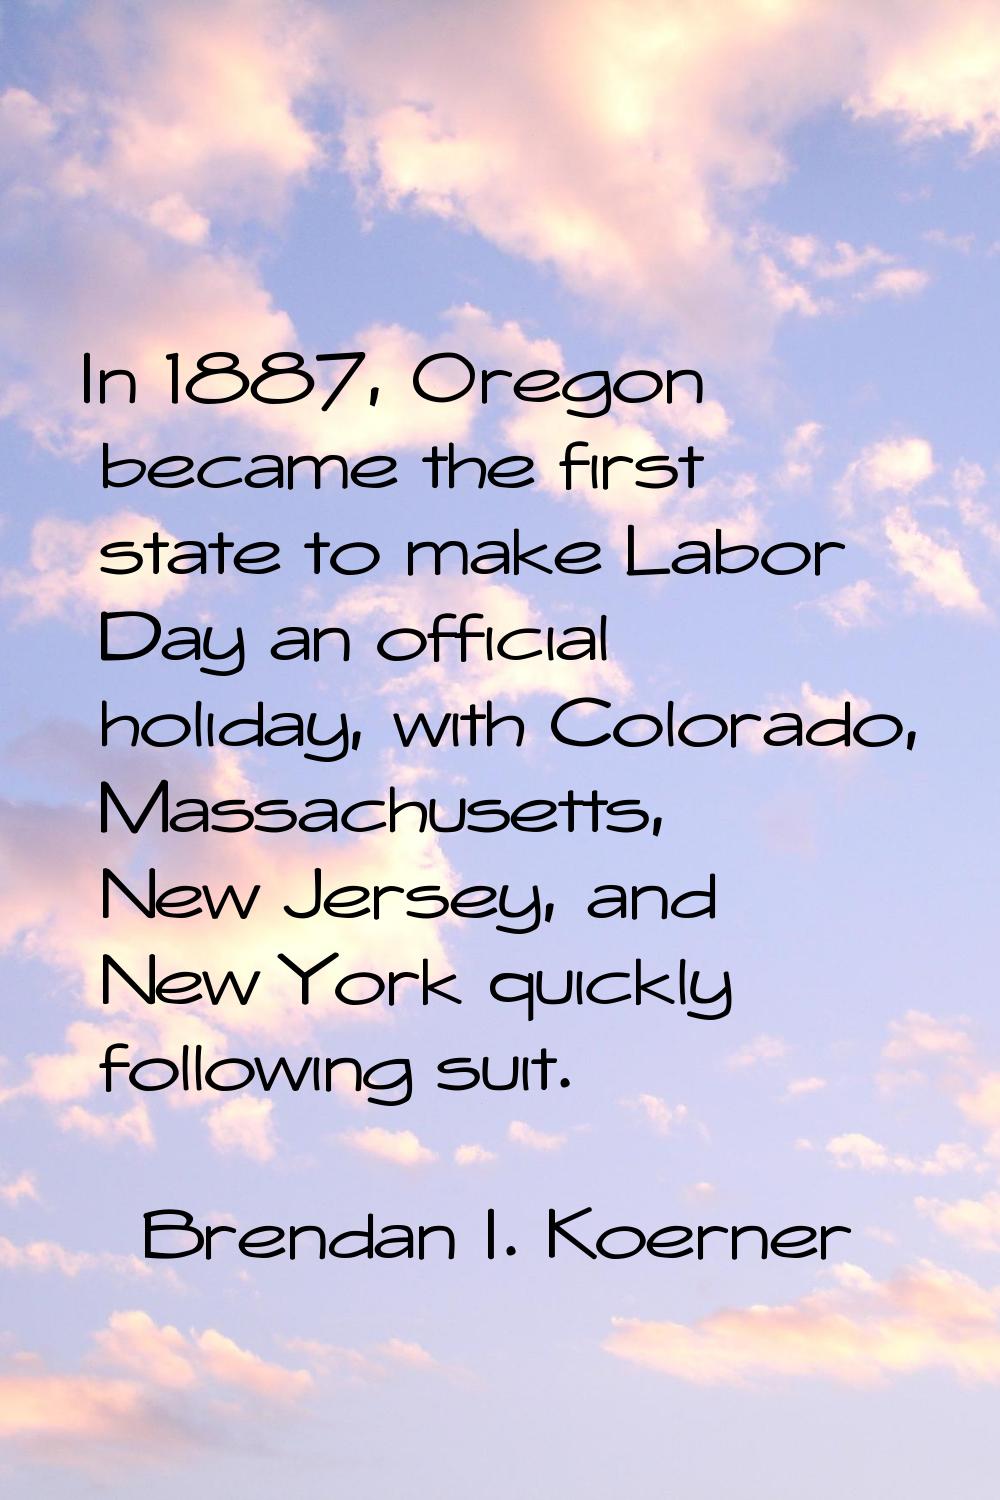 In 1887, Oregon became the first state to make Labor Day an official holiday, with Colorado, Massac